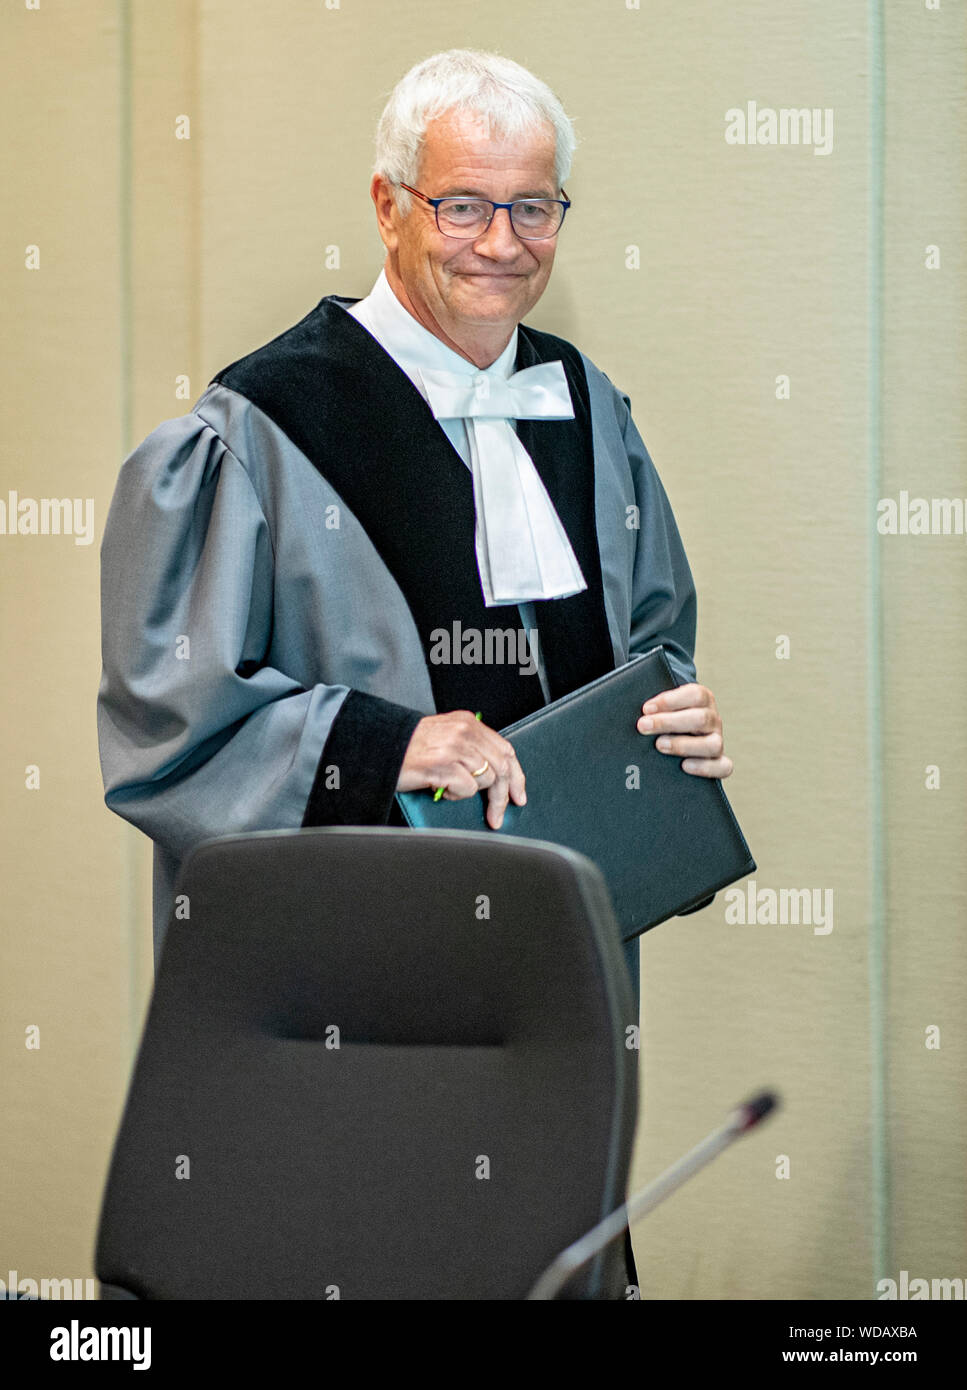 Schleswig, Germany. 29th Aug, 2019. Judge Bernhard Flor enters the courtroom of the state constitutional court before pronouncing a verdict in Doris von Sayn-Wittgenstein's suit against her exclusion from the AfD state parliamentary group. Sayn-Wittgenstein was not present at the Annunciation. Credit: Axel Heimken/dpa/Alamy Live News Stock Photo